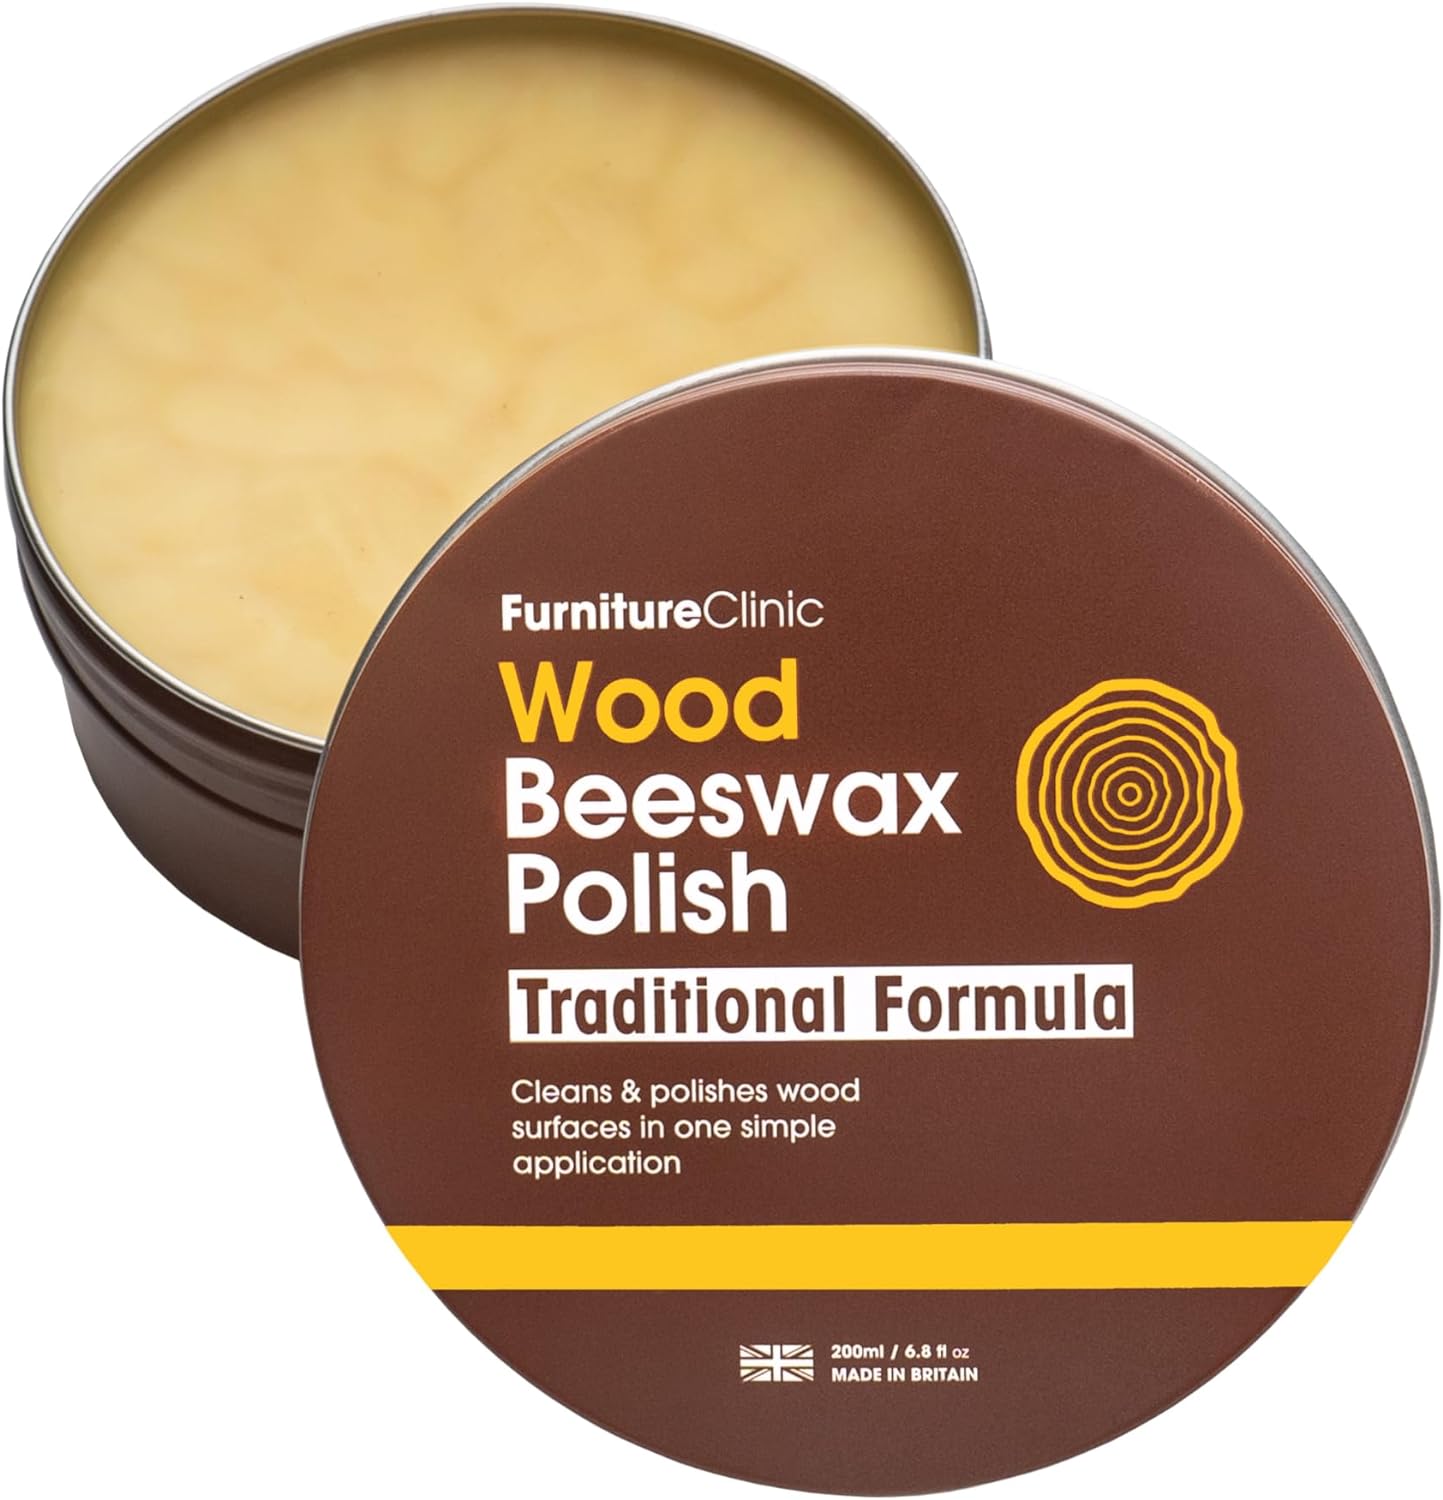 Furniture Clinic Premium Beeswax Polish (6.8oz/200ml) | Condition, Restore, Protect, & Waterproof Wood Furniture, Cabinets, and More | Natural Wax for all Wood Types & Colors - Oak, Teak, Dark & Light